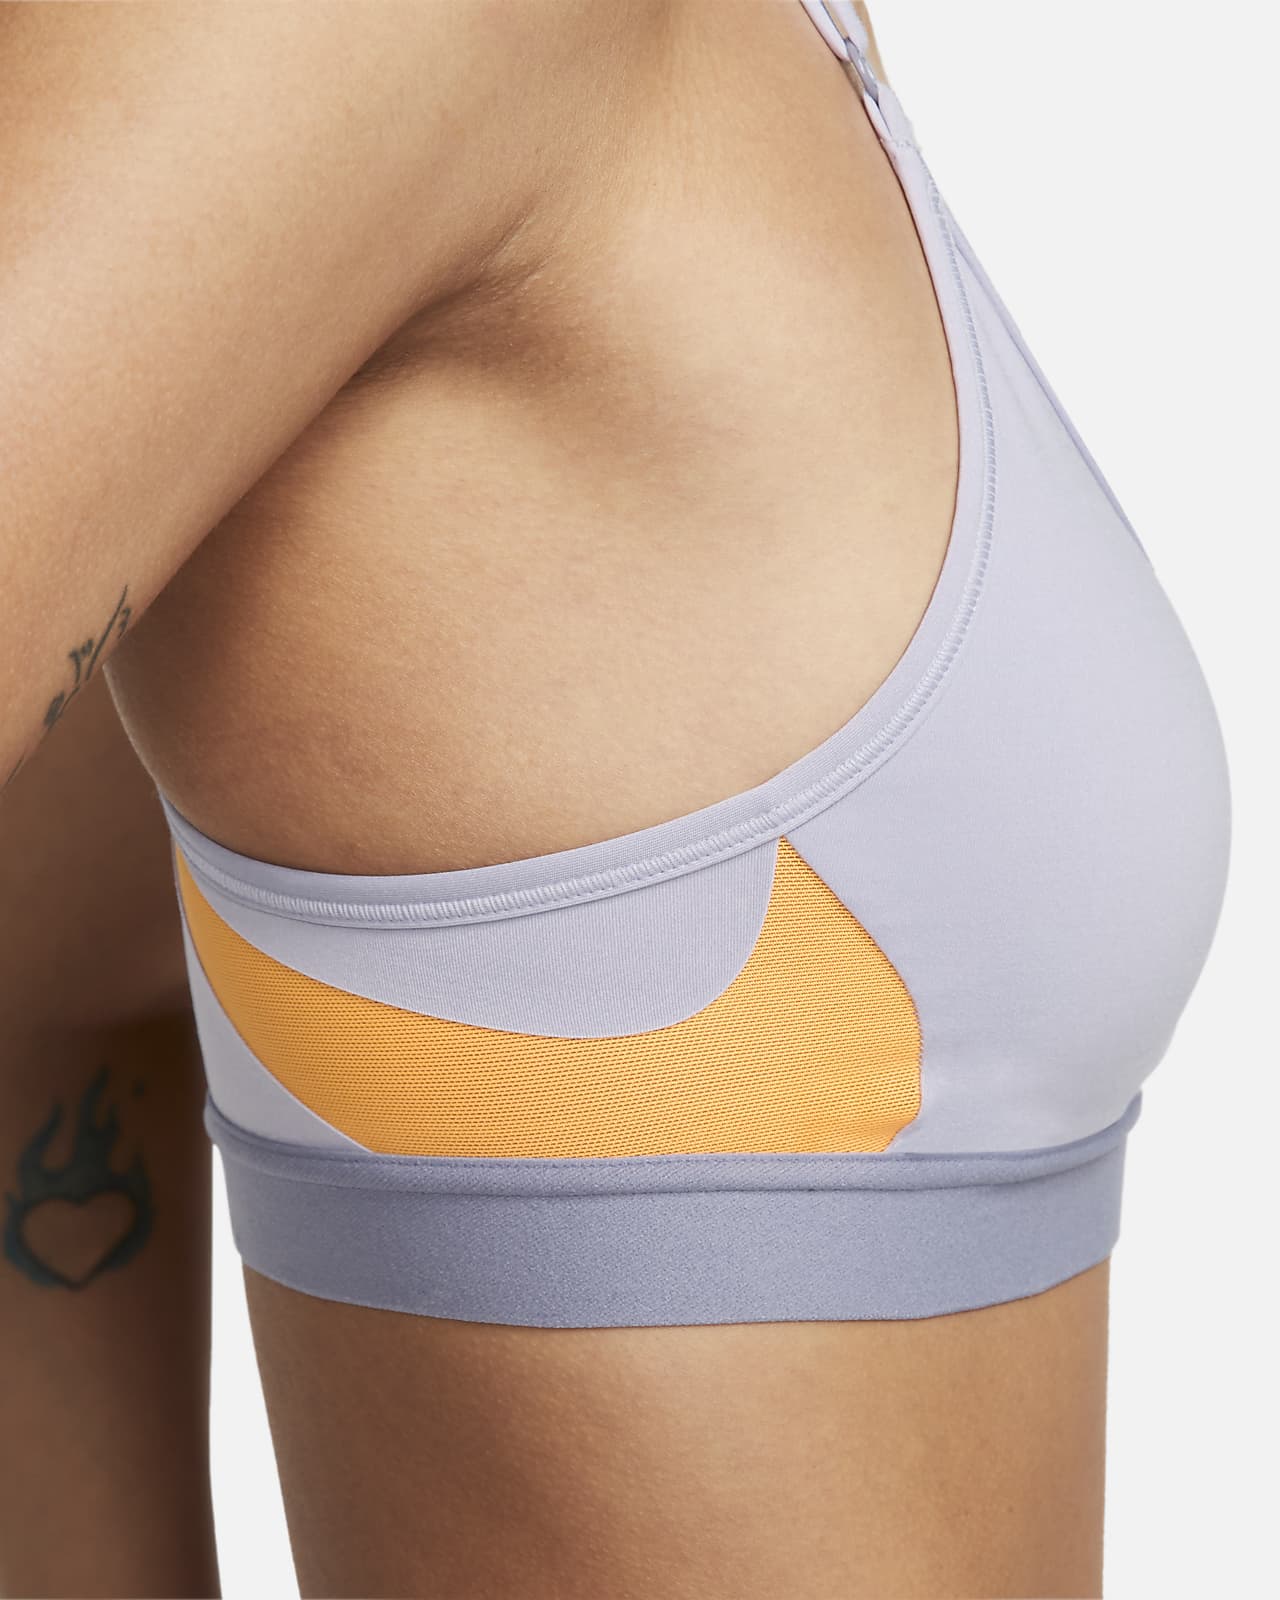 New Year Sale: All Items Blue Nike Indy Underwear.